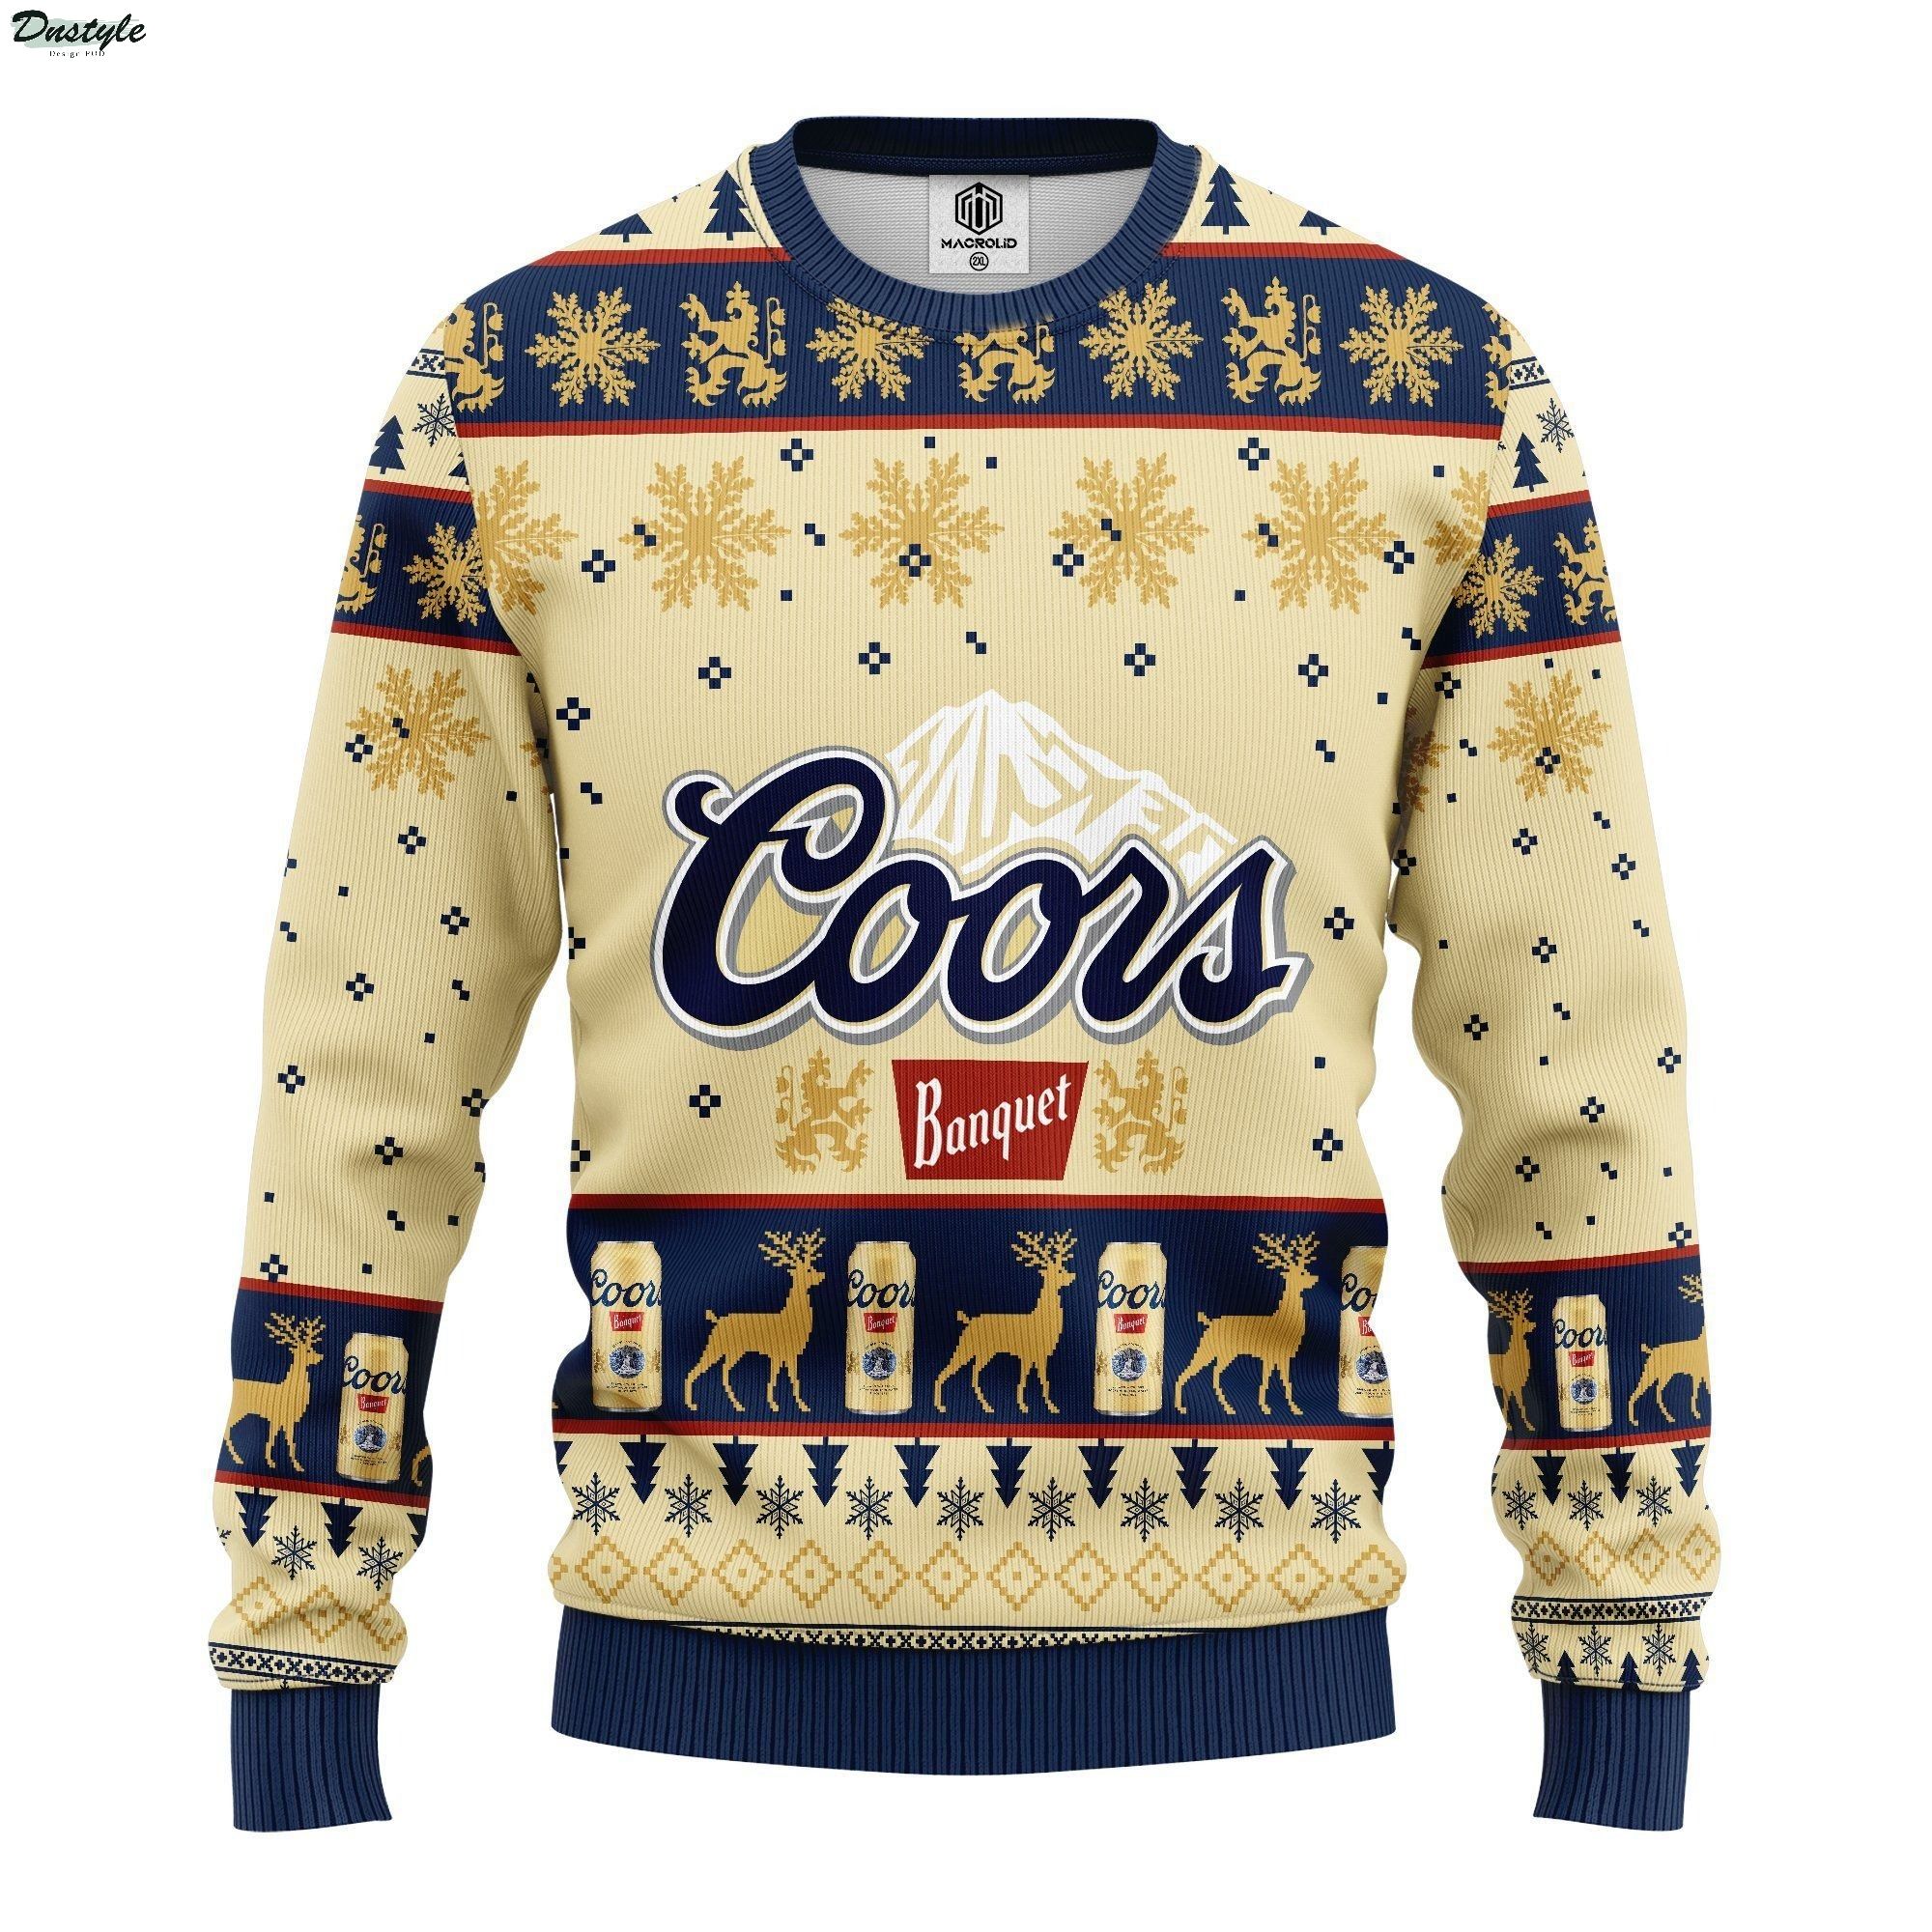 Coors banquet beer ugly christmas sweater